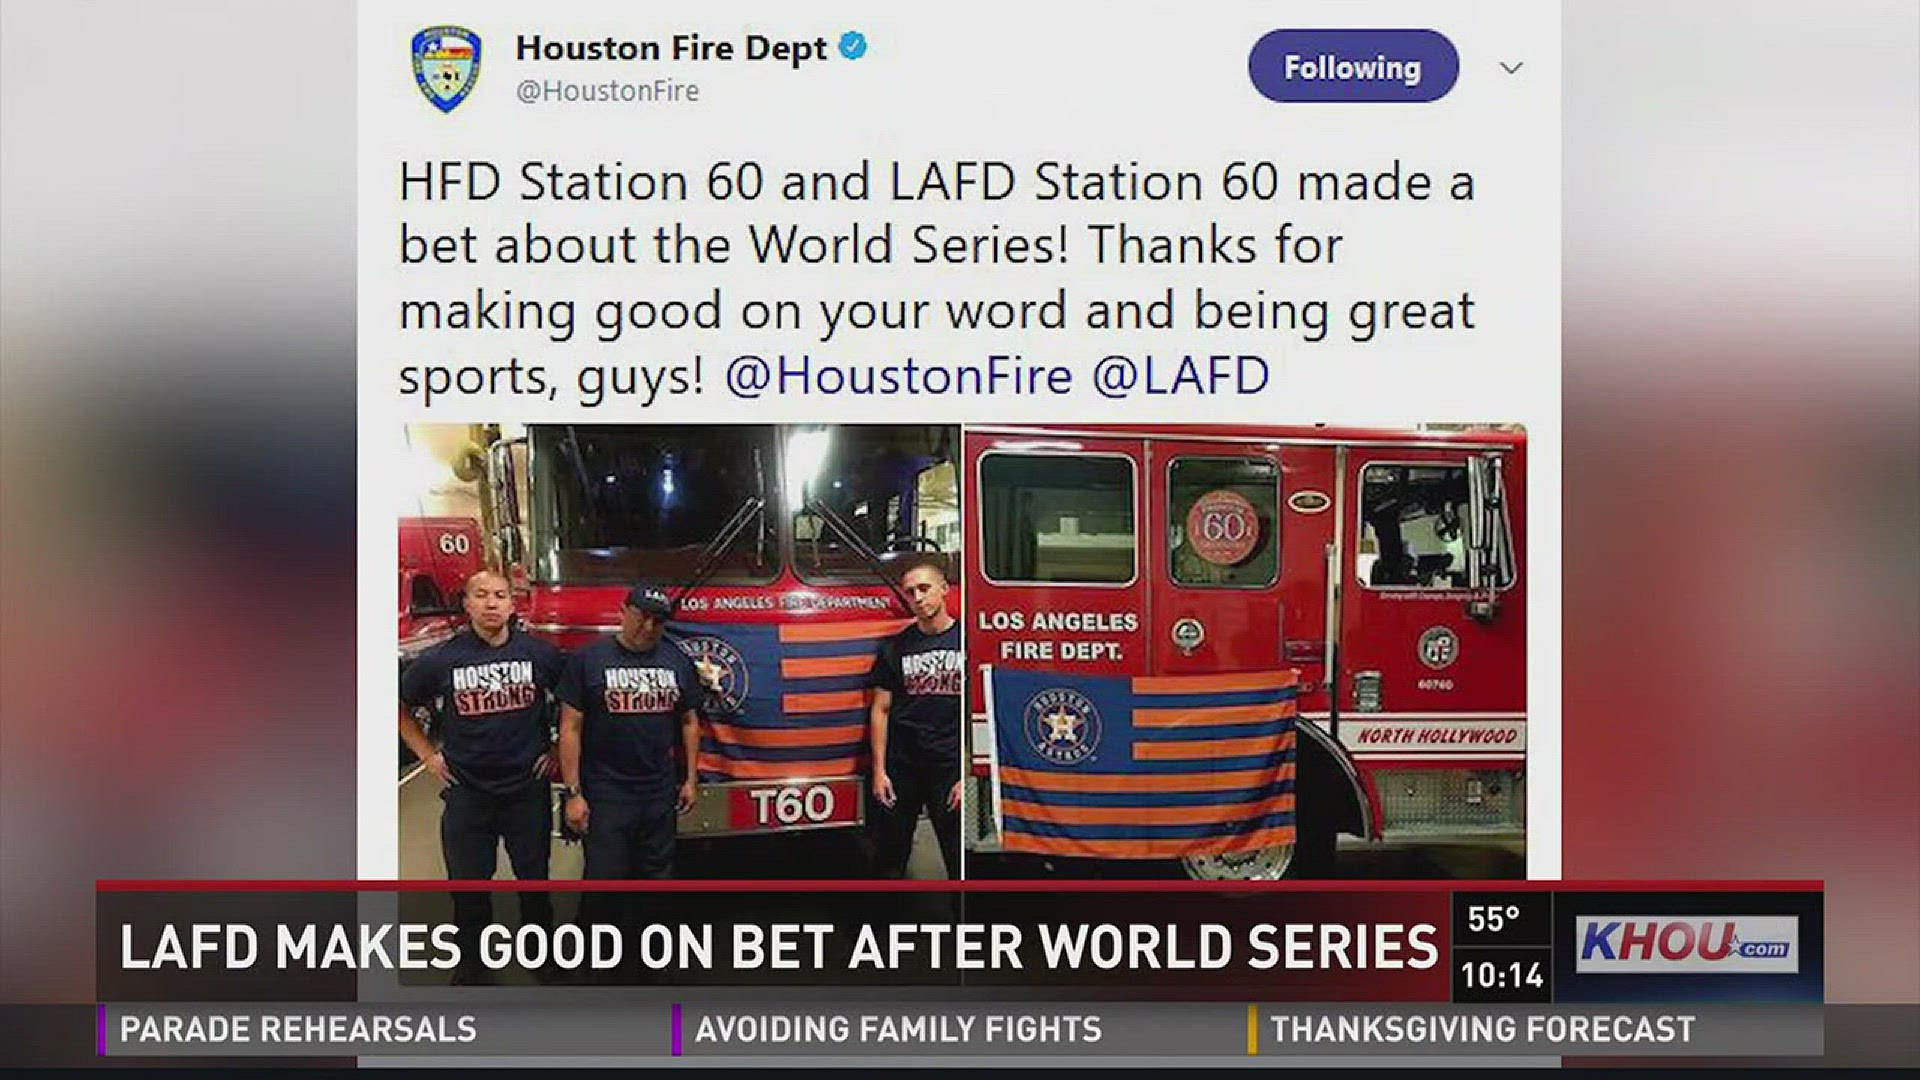 A Los Angeles fire station finally made good on a World Series bet it lost.